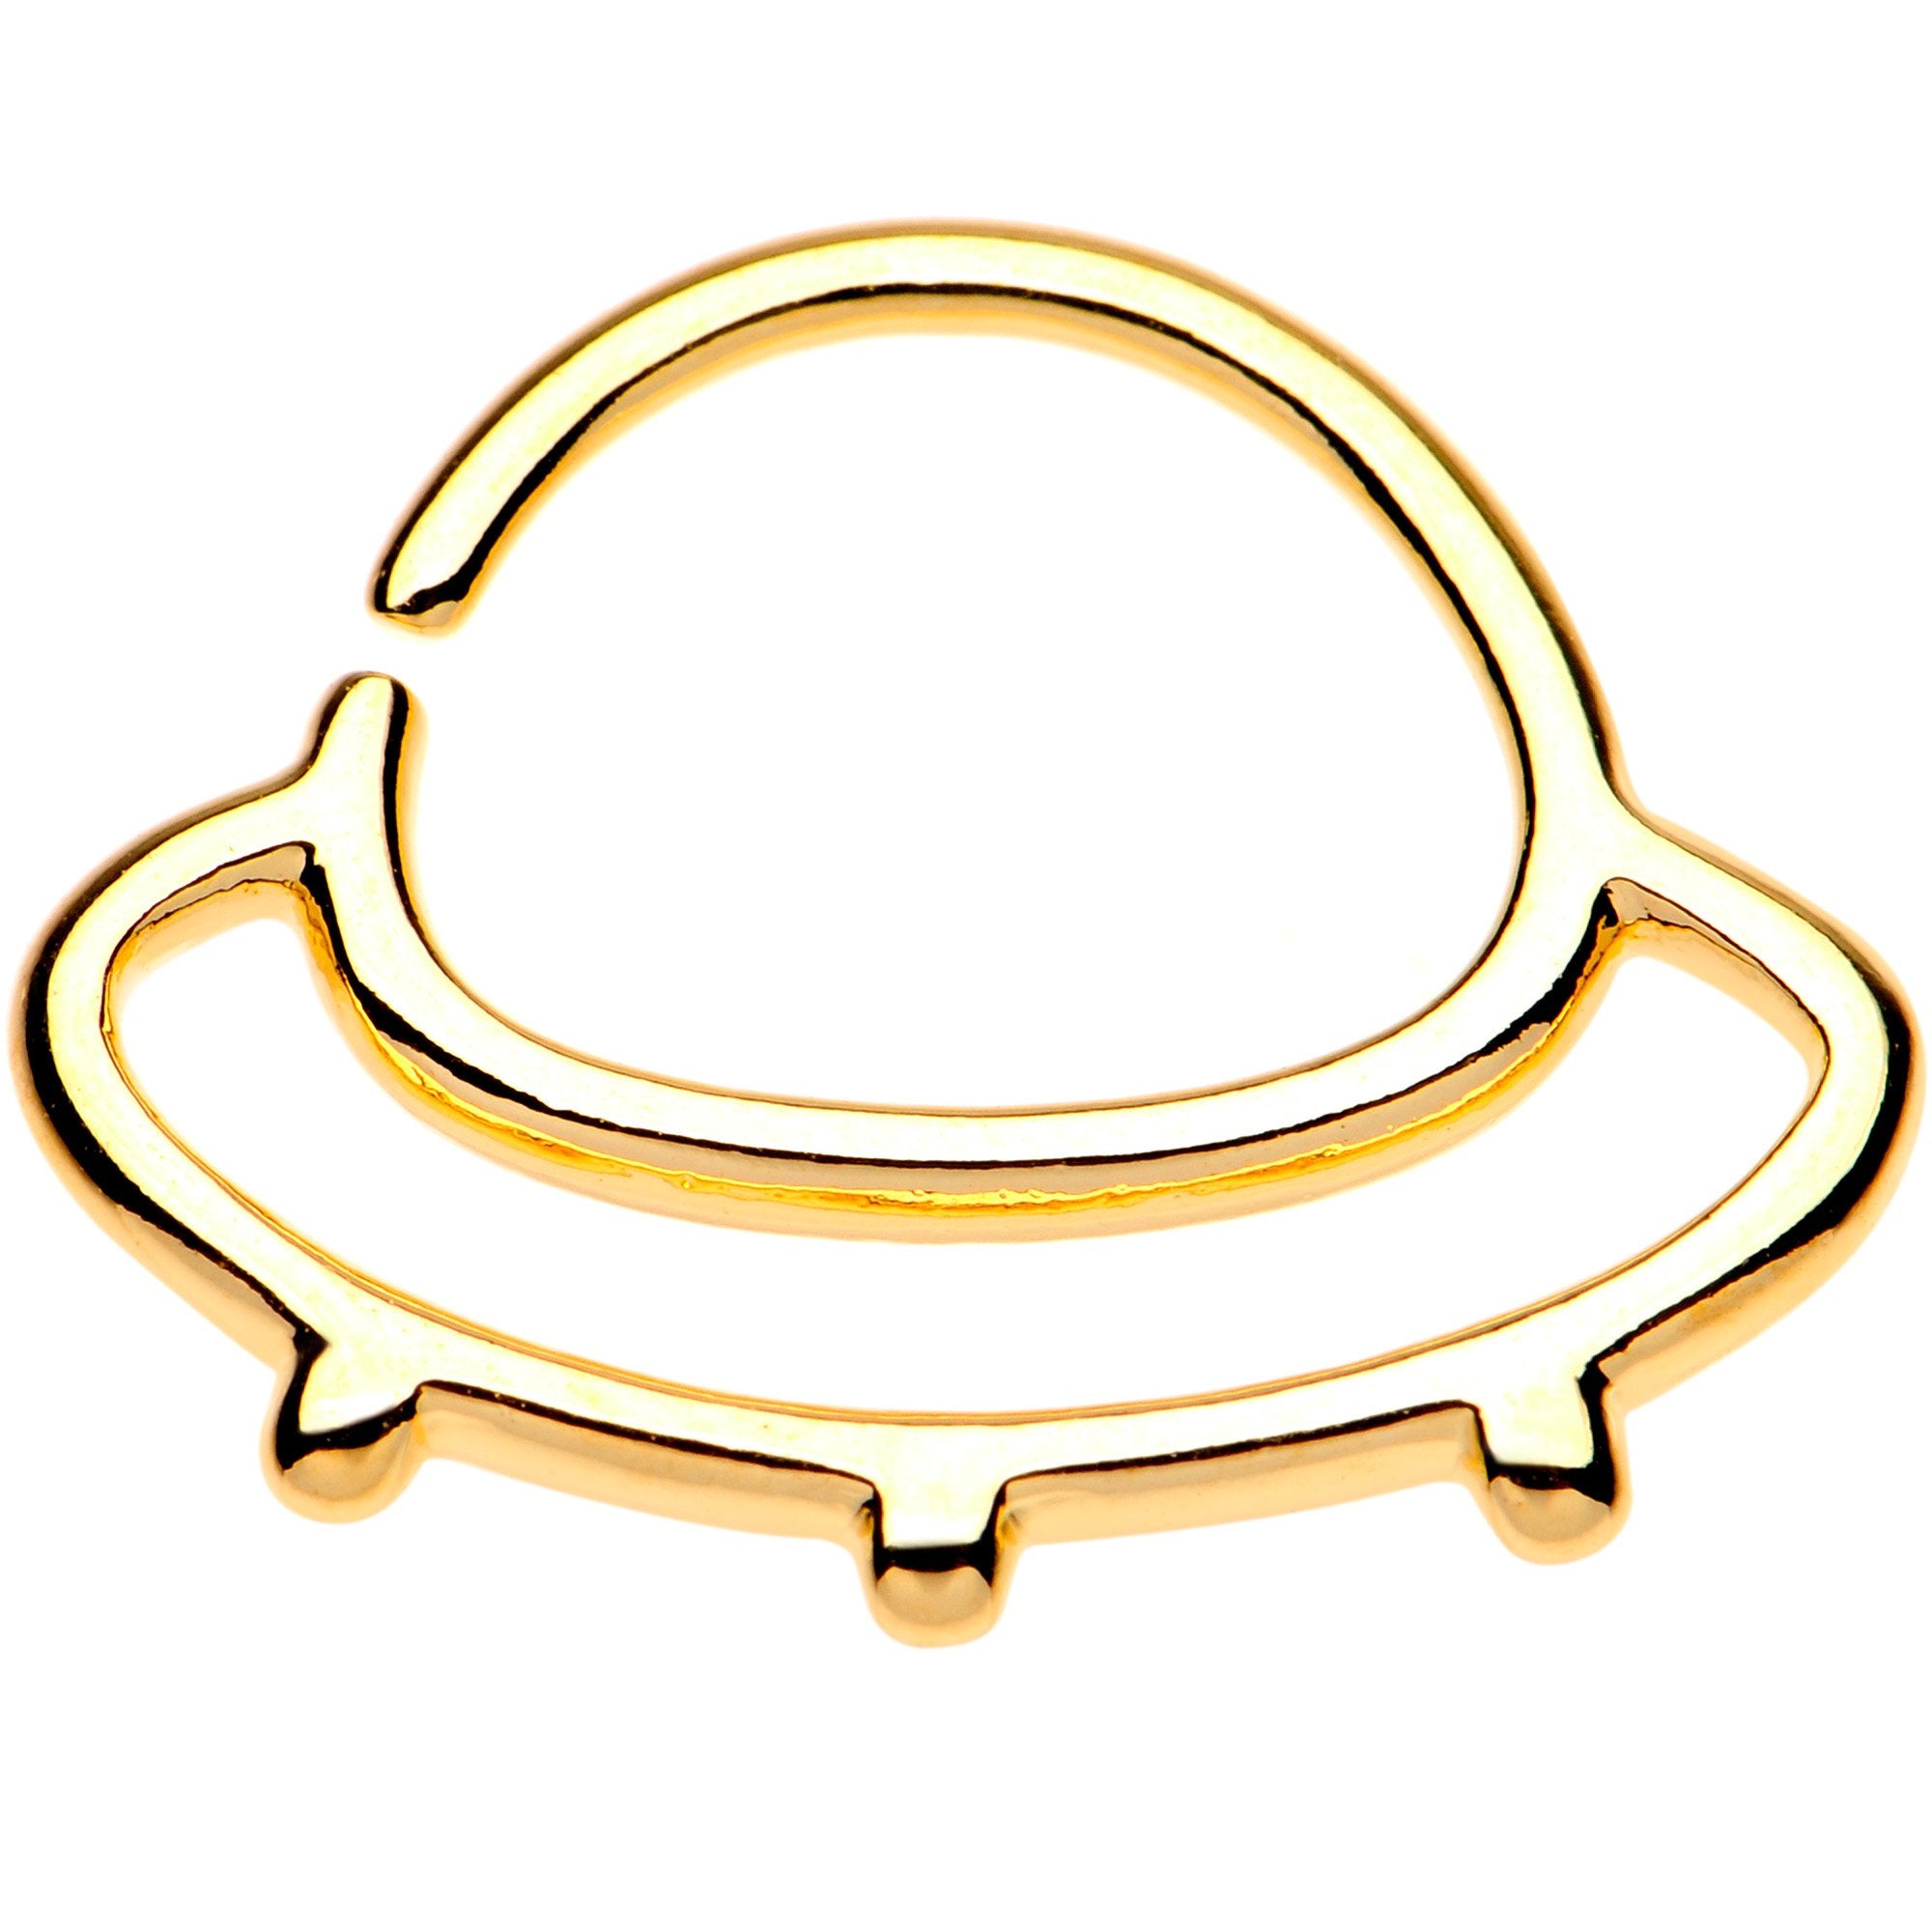 16 Gauge 3/8 Gold Tone Outer Space UFO Septum Ring